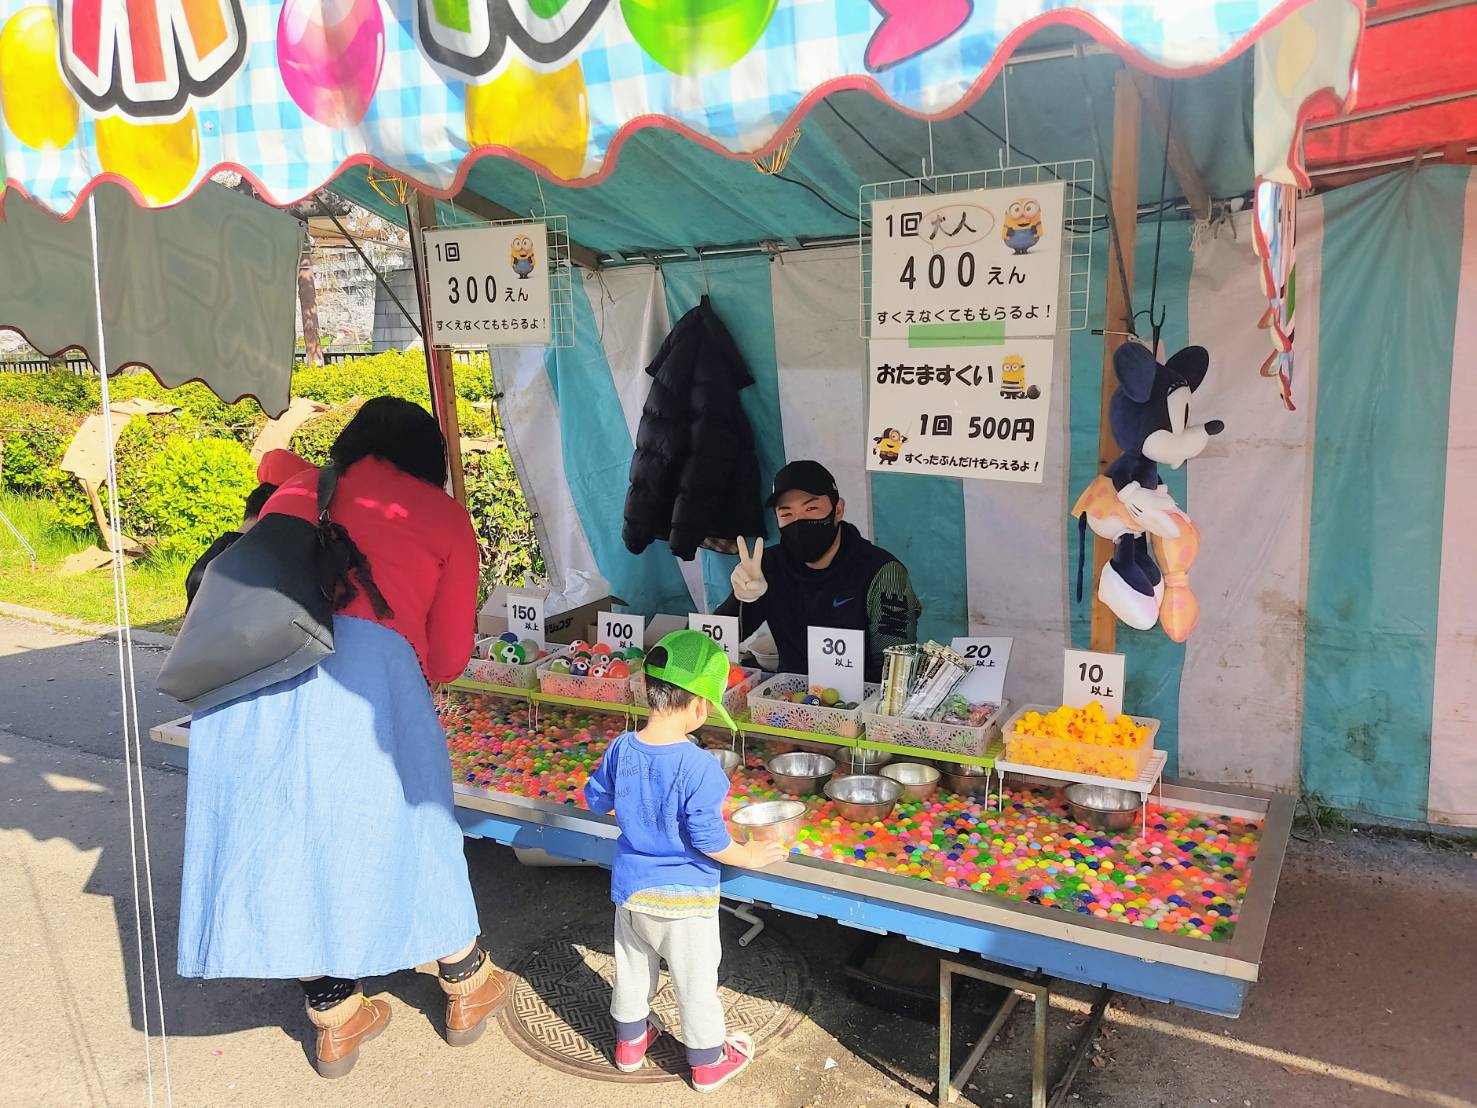 japan festival stand, super bouncy ball game